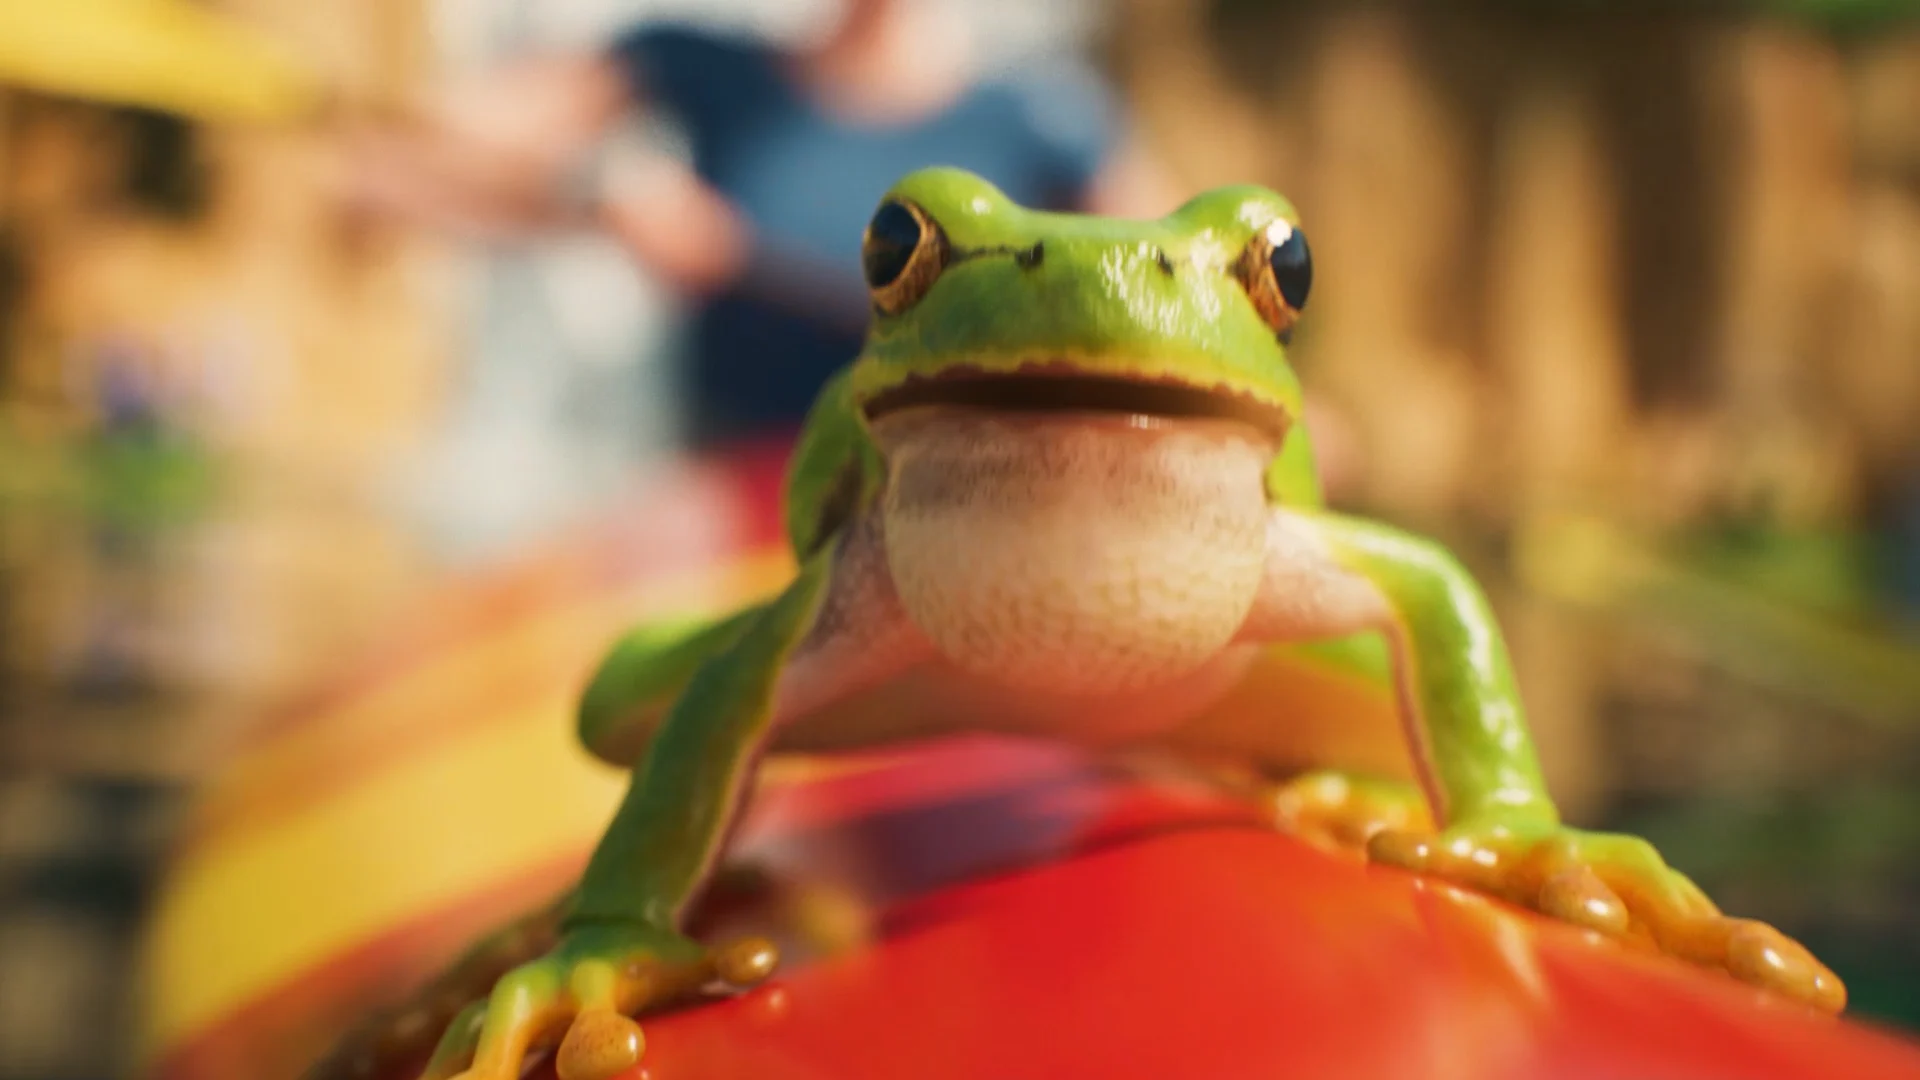 a cartoonish looking 3d frog sitting on a red underground in front of a blurry background
